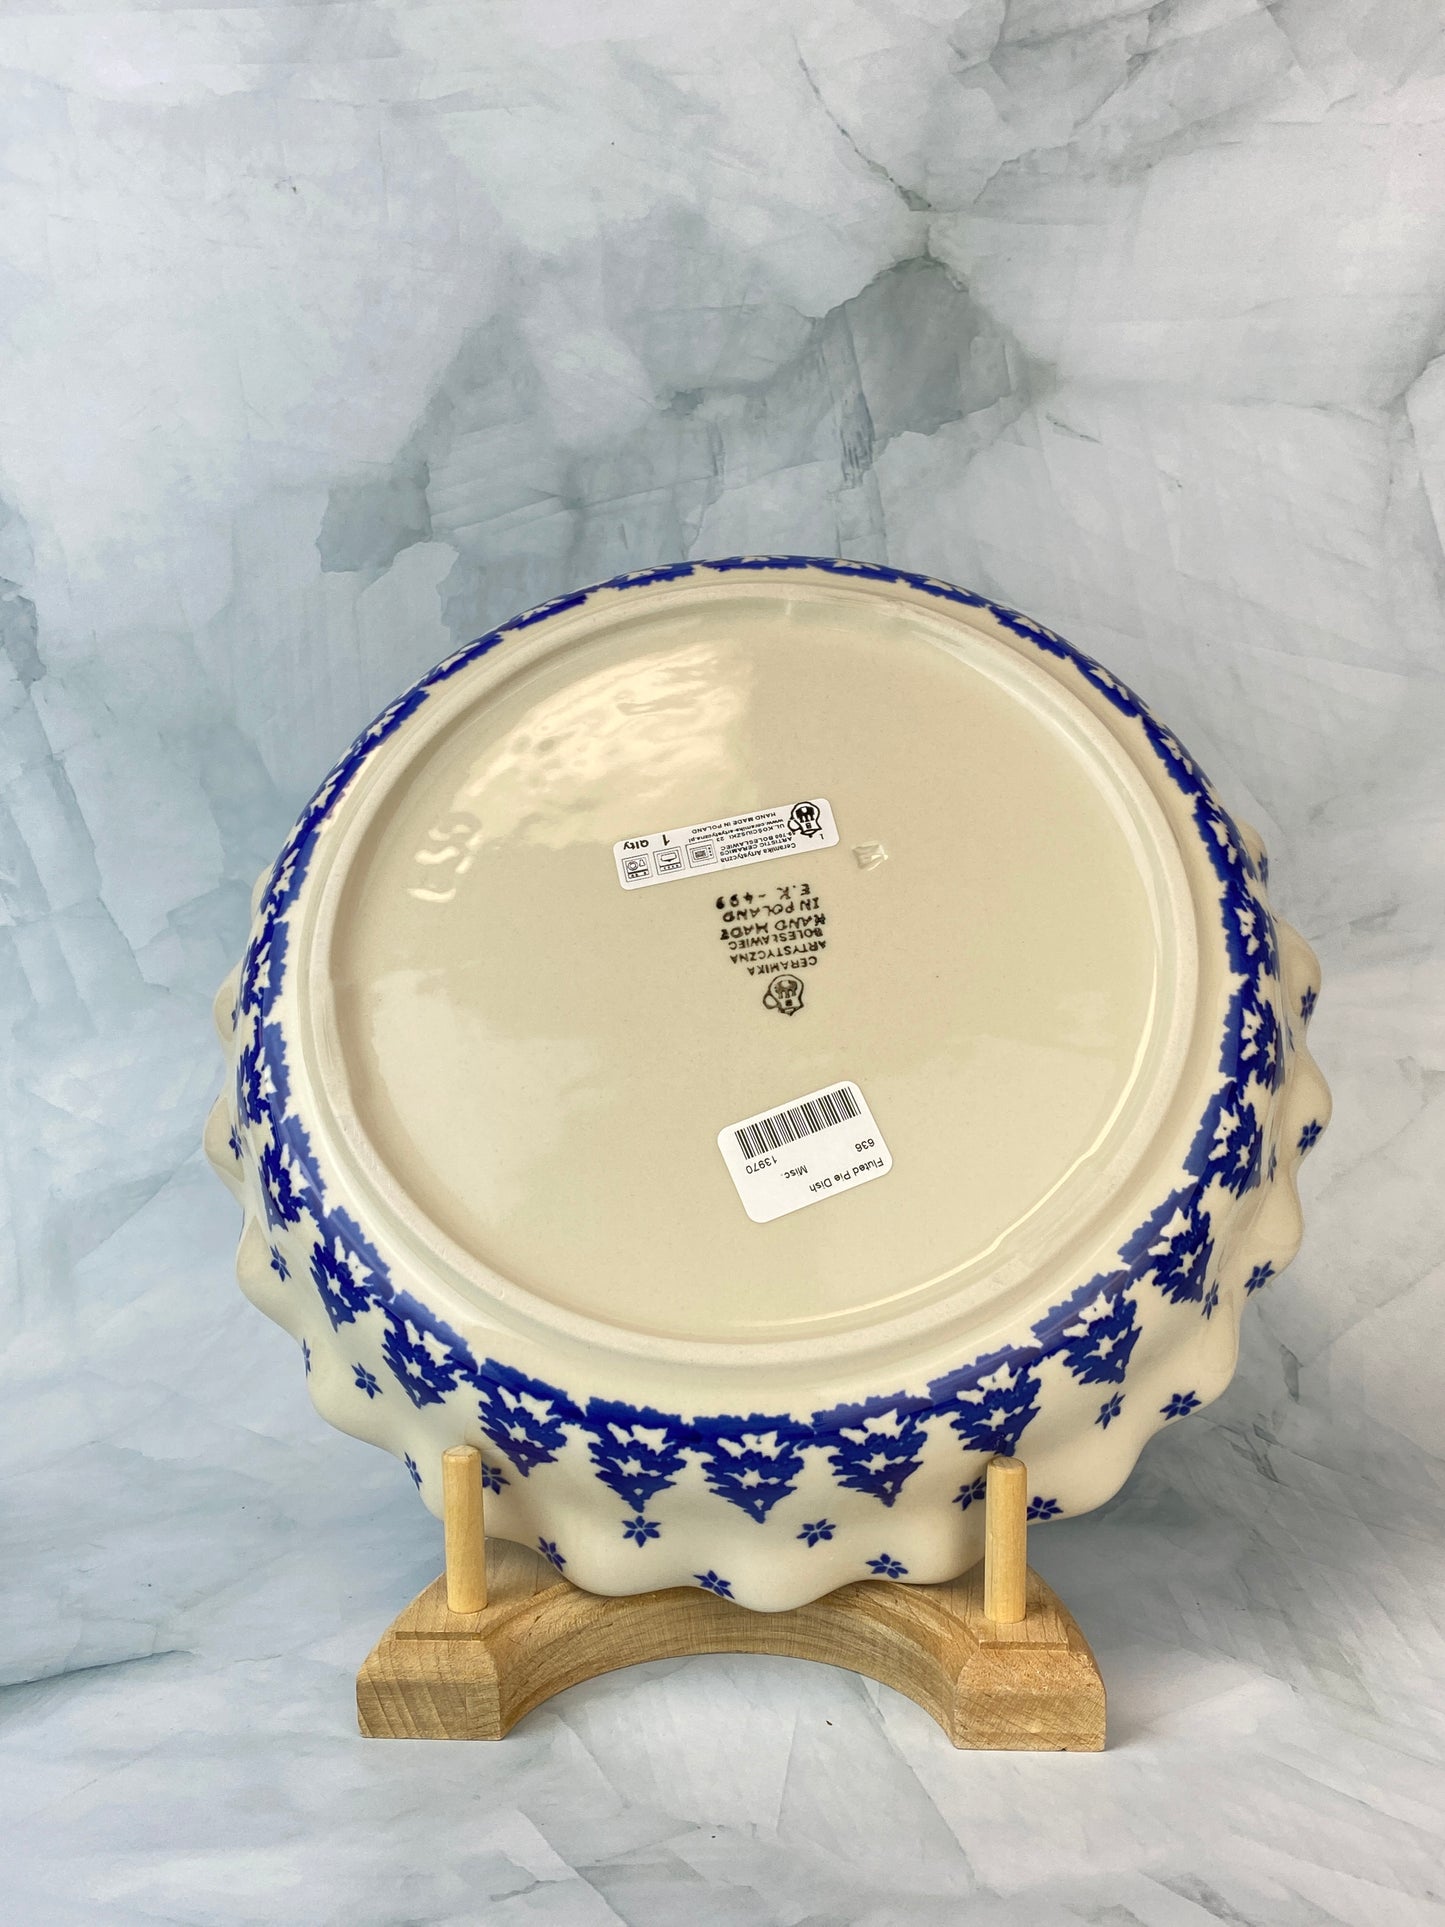 HOLIDAY SPECIAL Ruffled Pie Plate / Round Baking Dish - Shape 636 - Pattern 1931